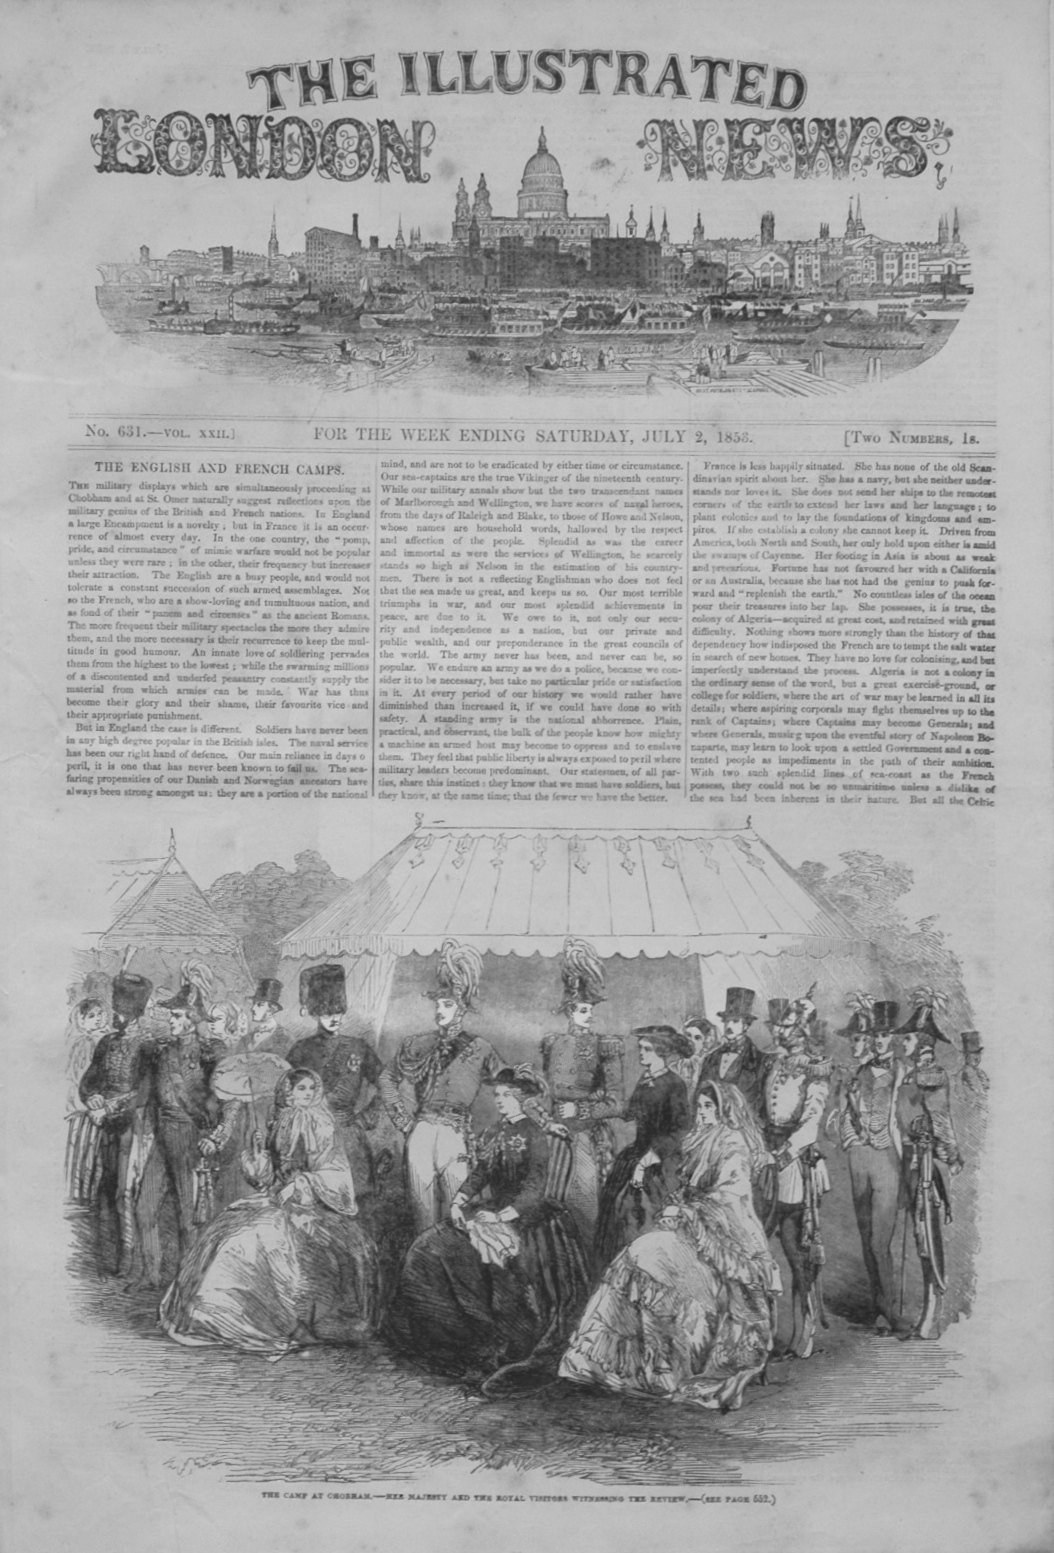 Illustrated London News for July 2nd 1853.